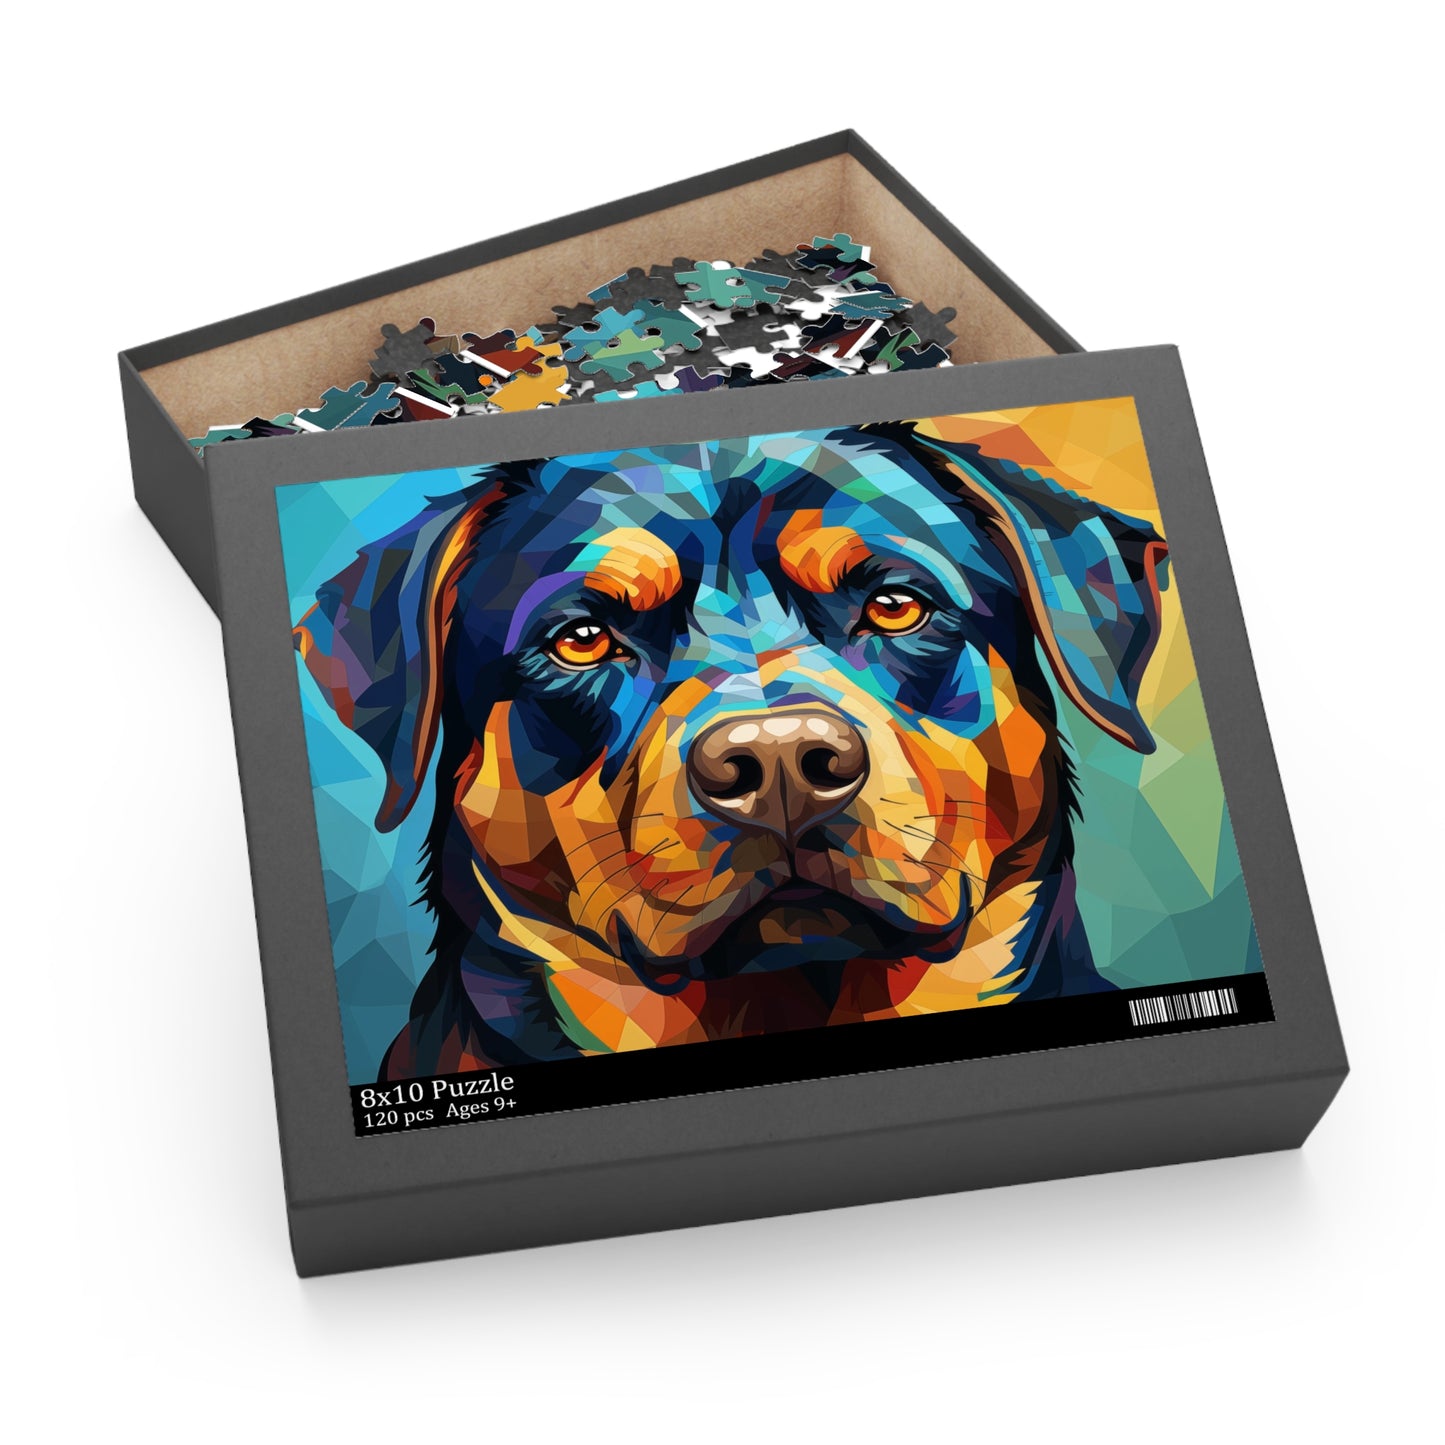 Watercolor Rottweiler Puzzle for Boys, Girls, Kids - Jigsaw Vibrant Oil Paint Dog Puzzle - Abstract Lover Gift - Rottweiler Trippy Puzzle Adult Birthday Business Jigsaw Puzzle Gift for Him Funny Humorous Indoor Outdoor Game Gift For Her Online-6